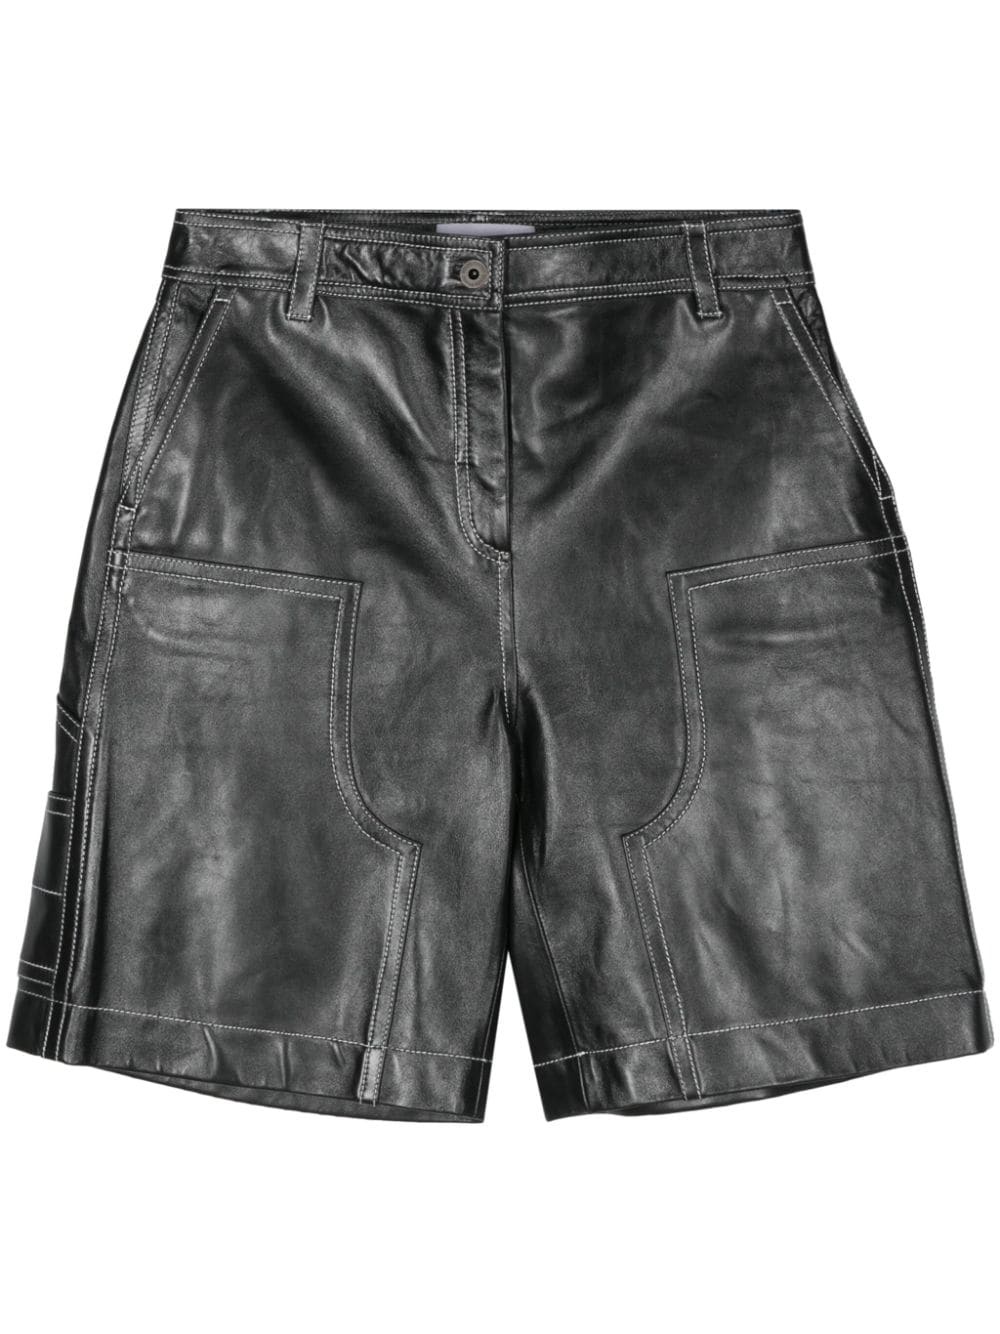 Rue leather shorts - 1